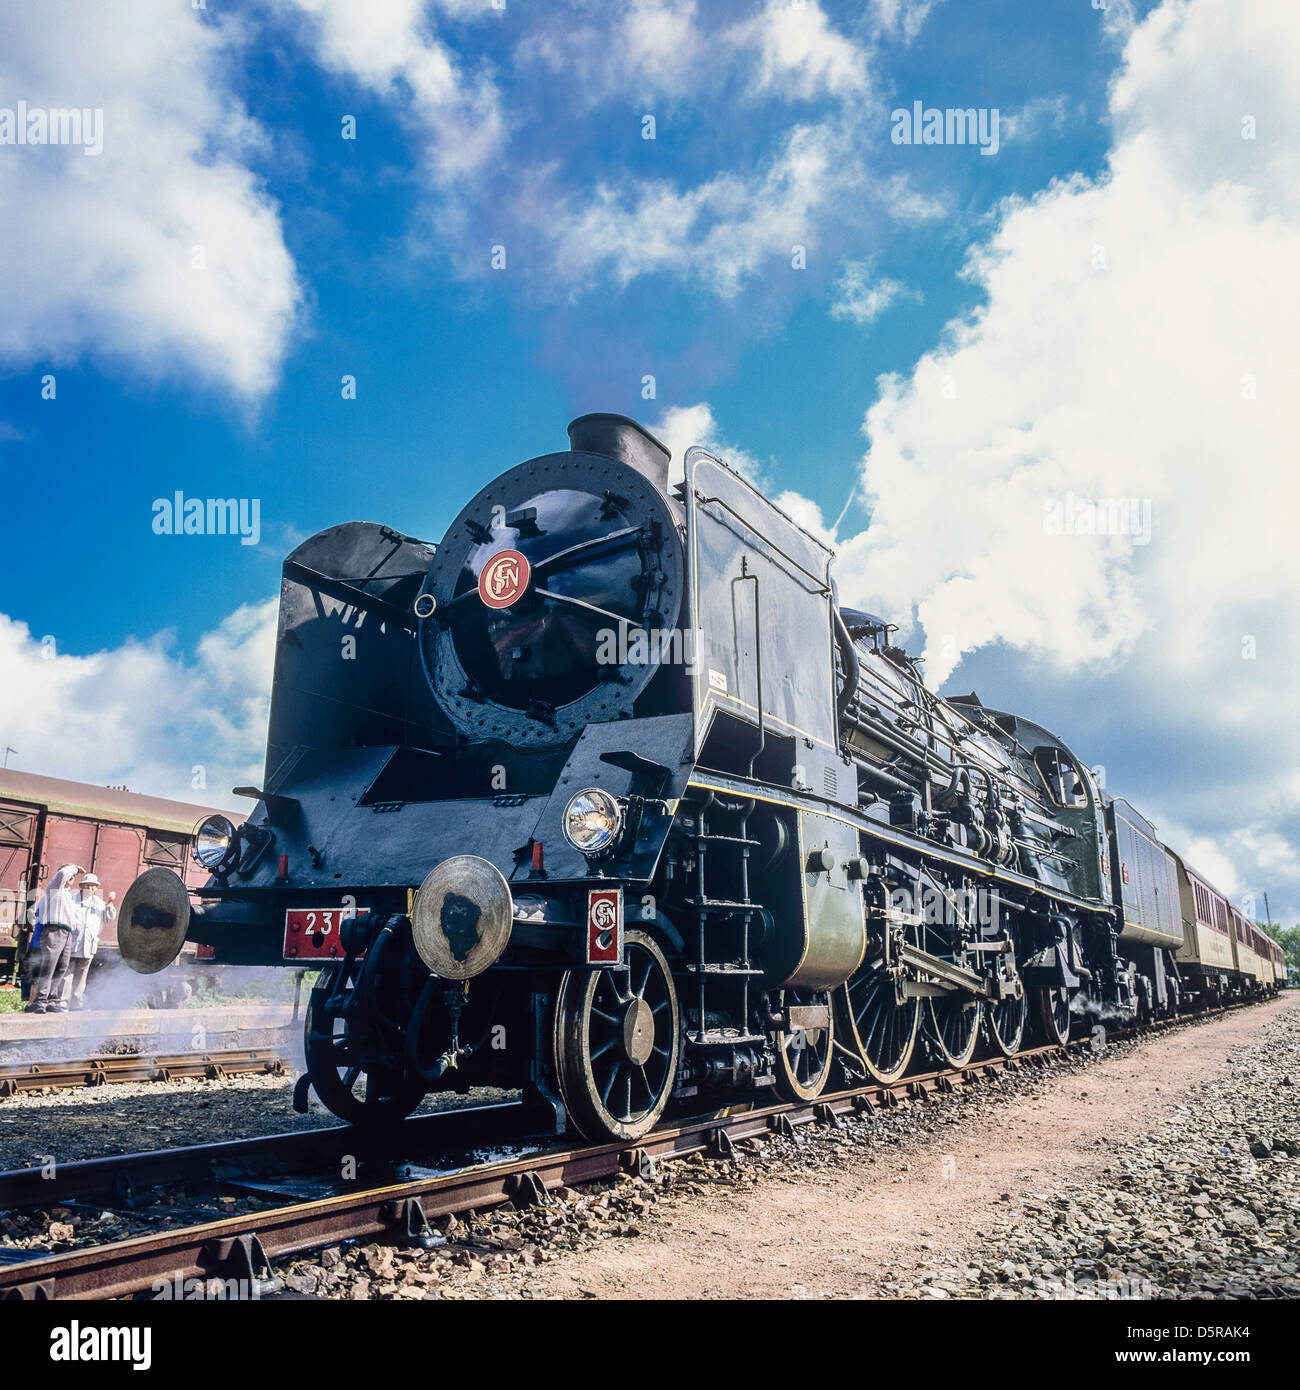 Historic steam locomotive "Pacific PLM 231 K 8" of "Paimpol-Pontrieux" train Brittany France Europe Stock Photo